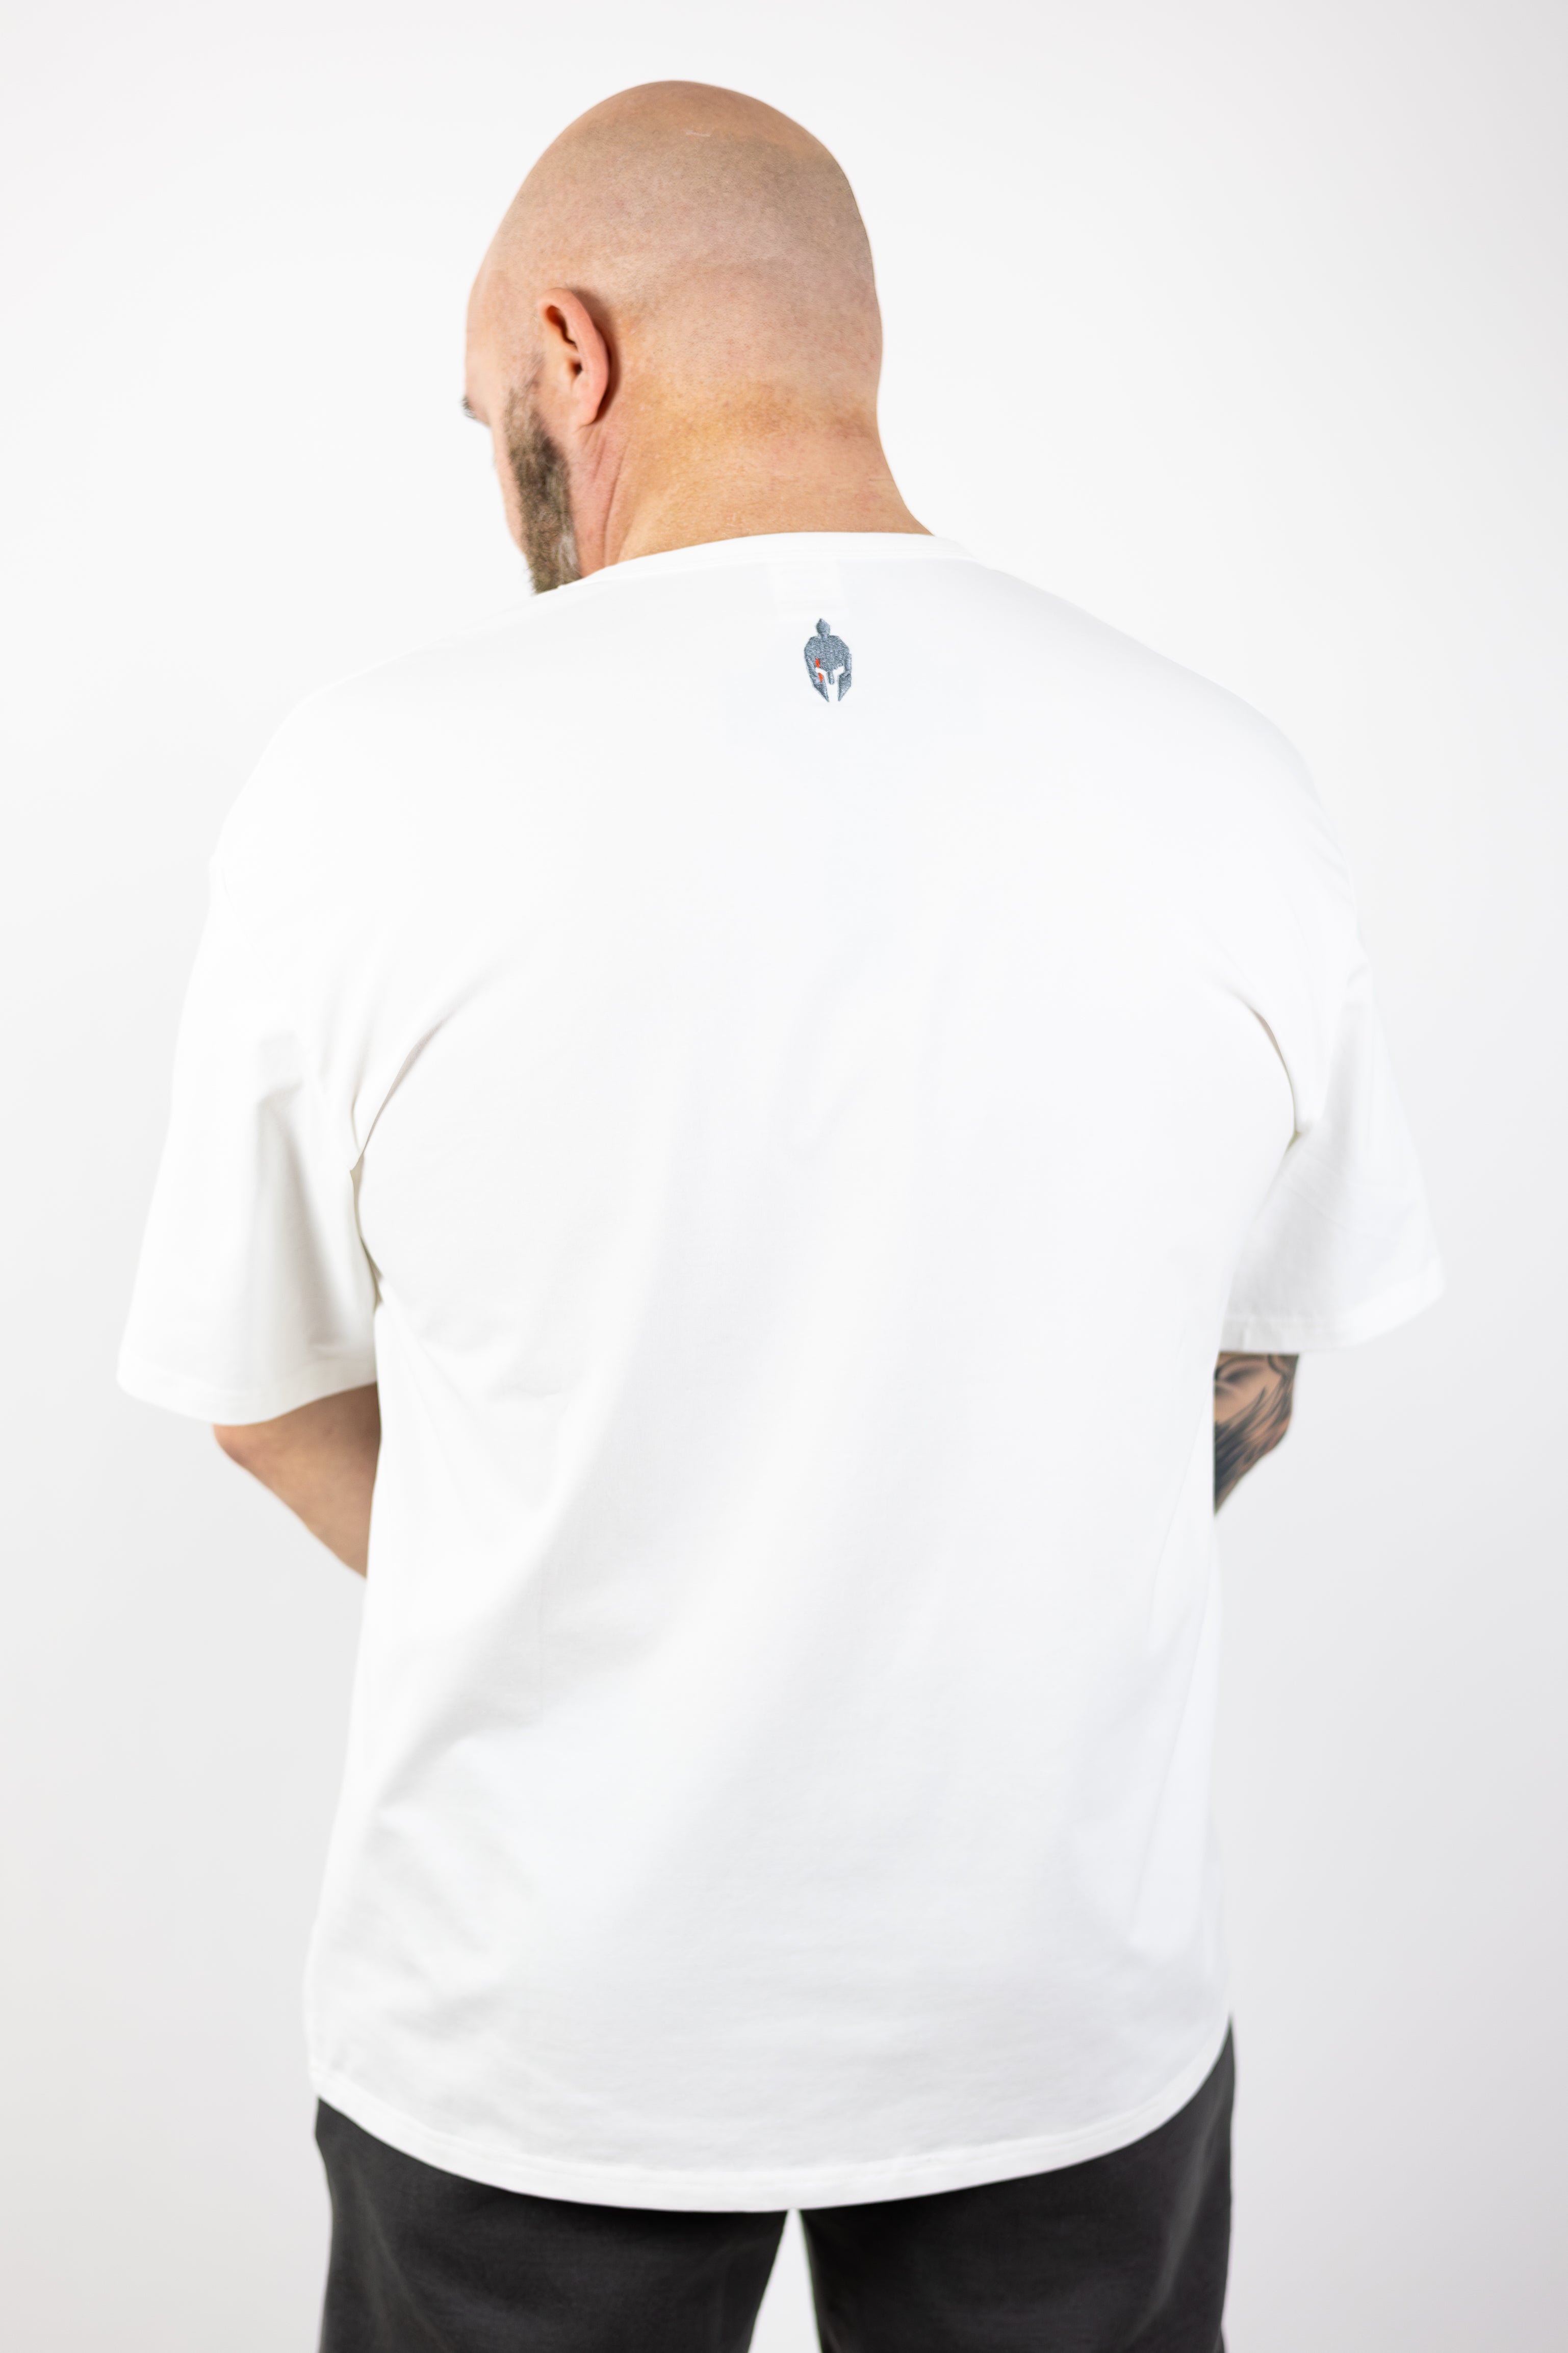 man turned around modeling Strength of One white workout shirt with helmet logo embroidered on top back neck